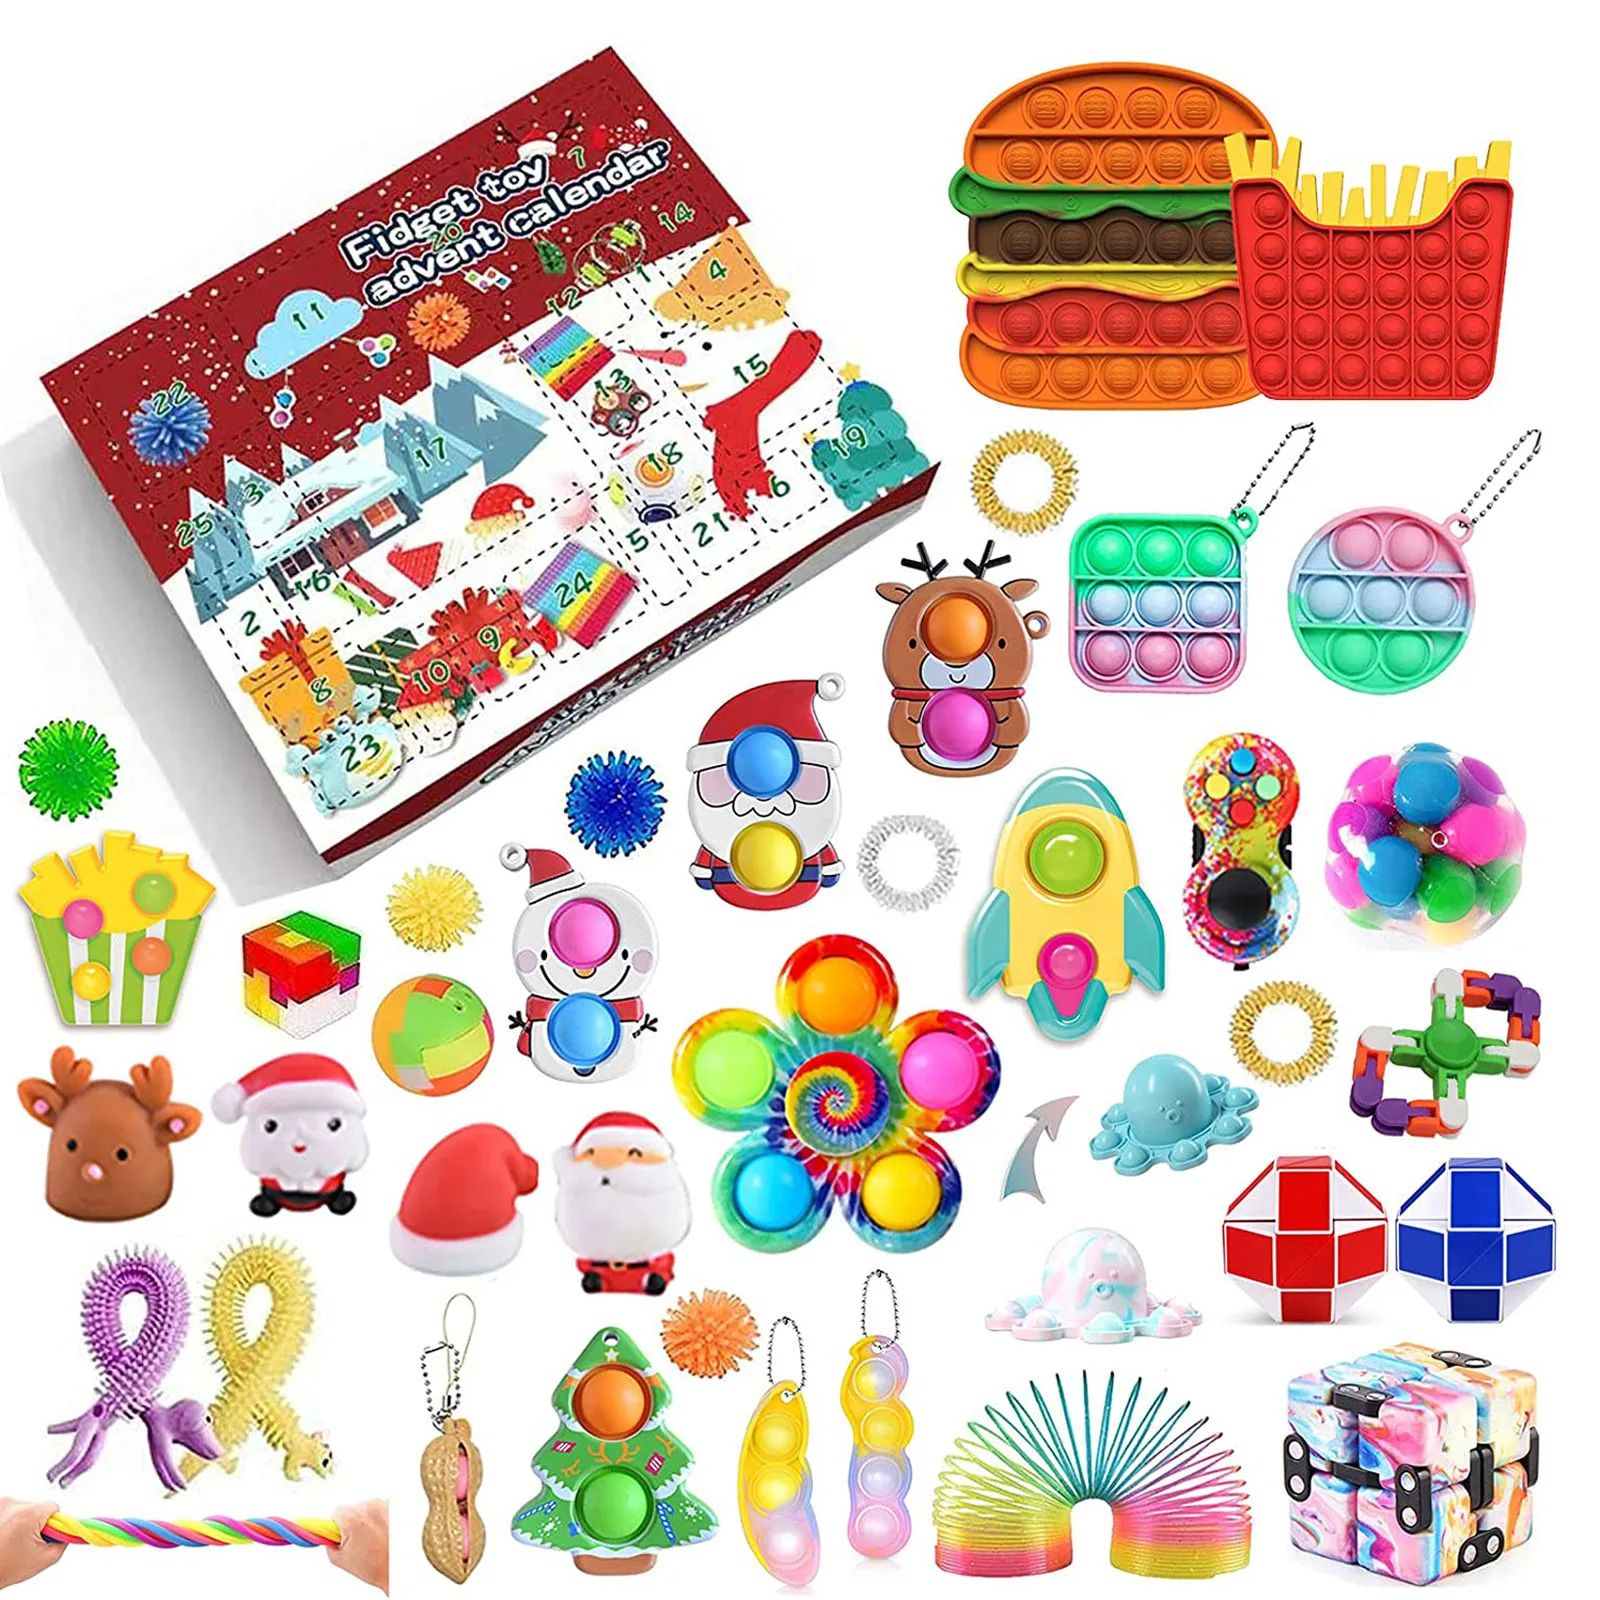 Stress Relief Christmas Surprise Box Gifts Xmas Party Favor Christmas Advent Calendar 2021 Fidget Christmas Countdown Calendar 24 Days Sensory Fidget Toy Set Novelty Decorations Squeezing Toy